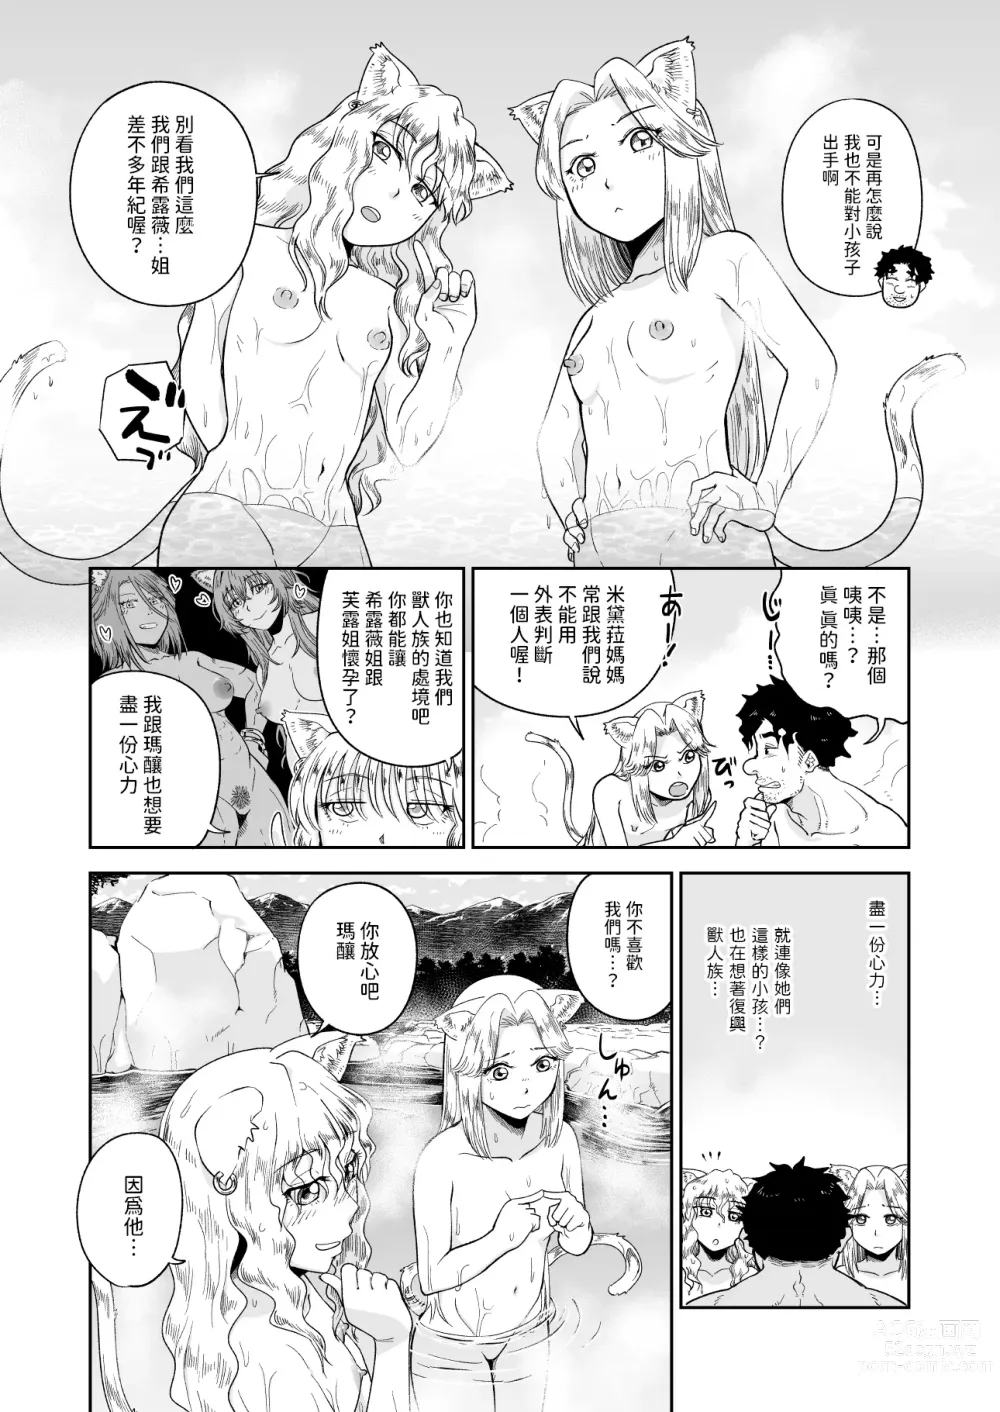 Page 12 of doujinshi ケモ耳娘とゼロから性活 3  中文翻譯